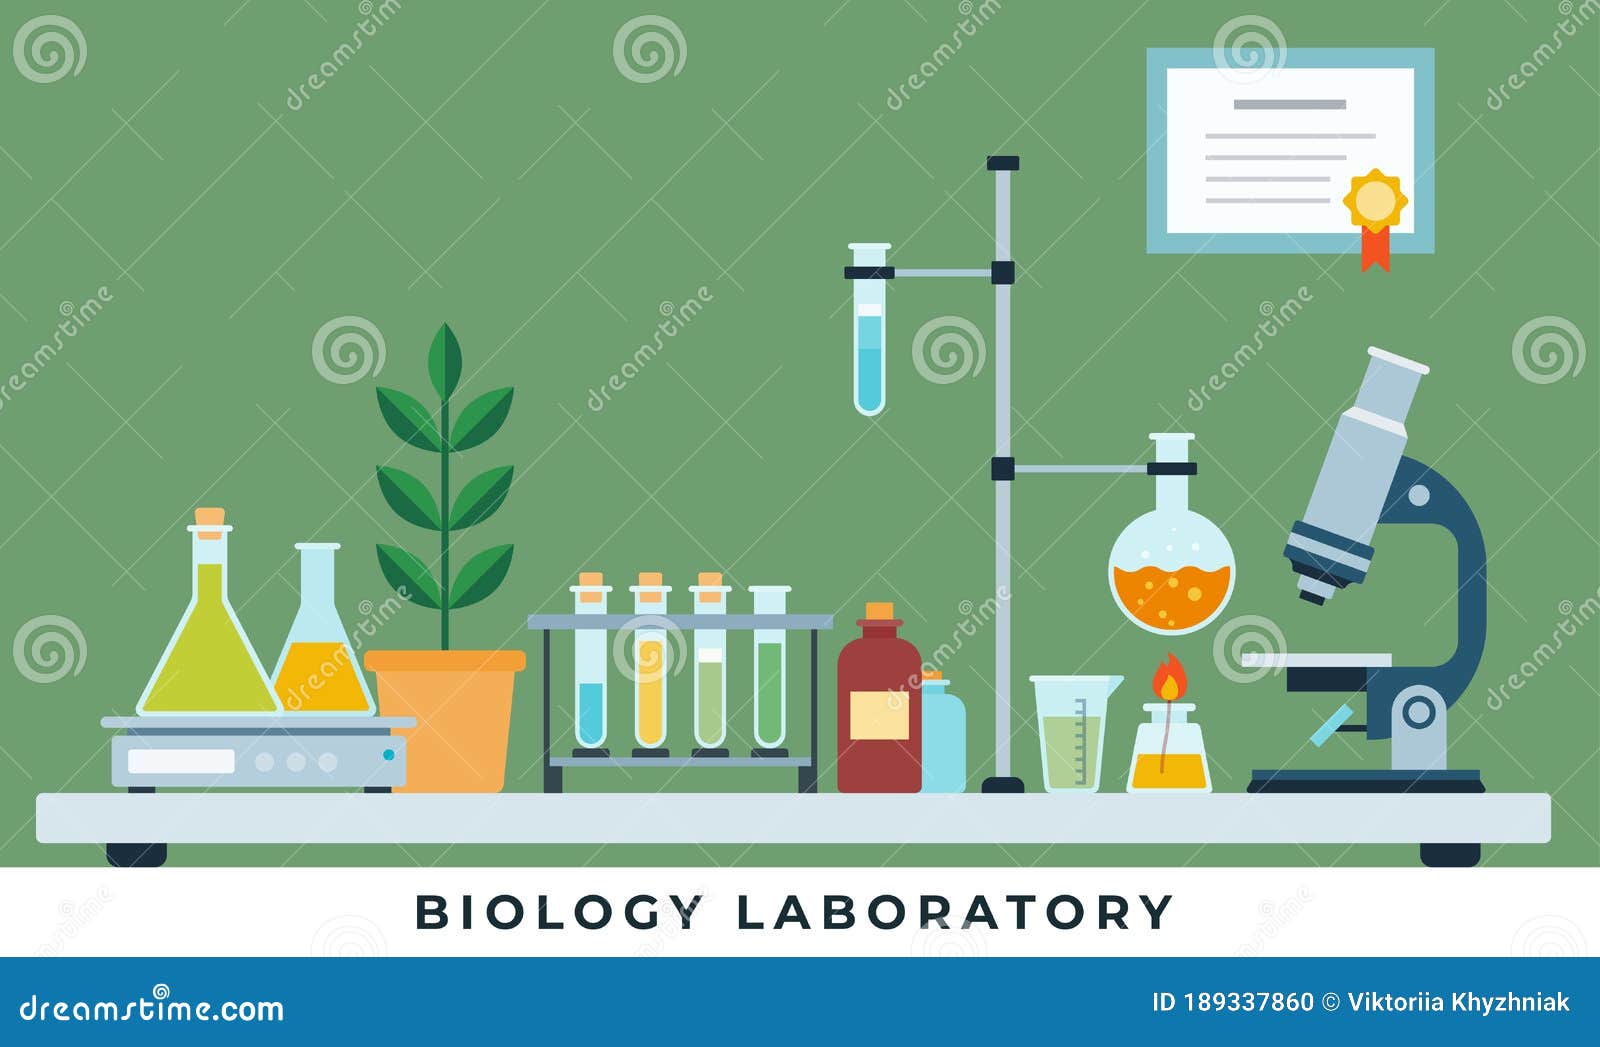 Biology Laboratory Vector Illustration in Flat Style. Stock Vector ...